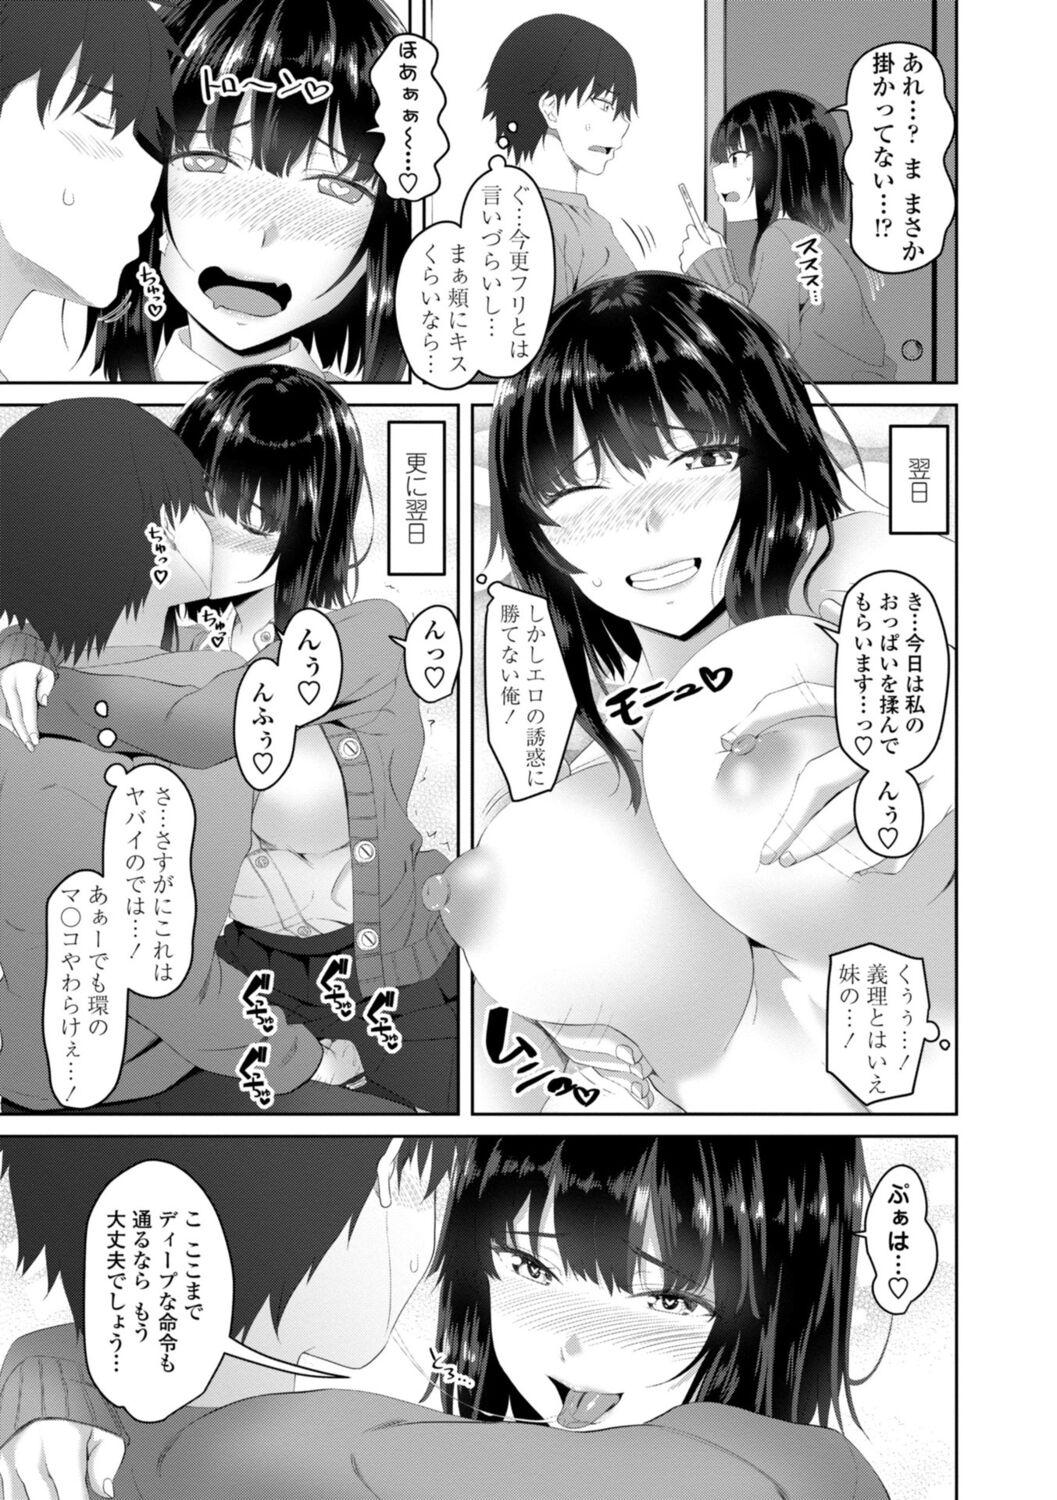 Gay Bukkakeboy [Arsenal] Onii-chan no H na Otoshikata - How to make your brother like you for sex. [Digital] Gay Baitbus - Page 9